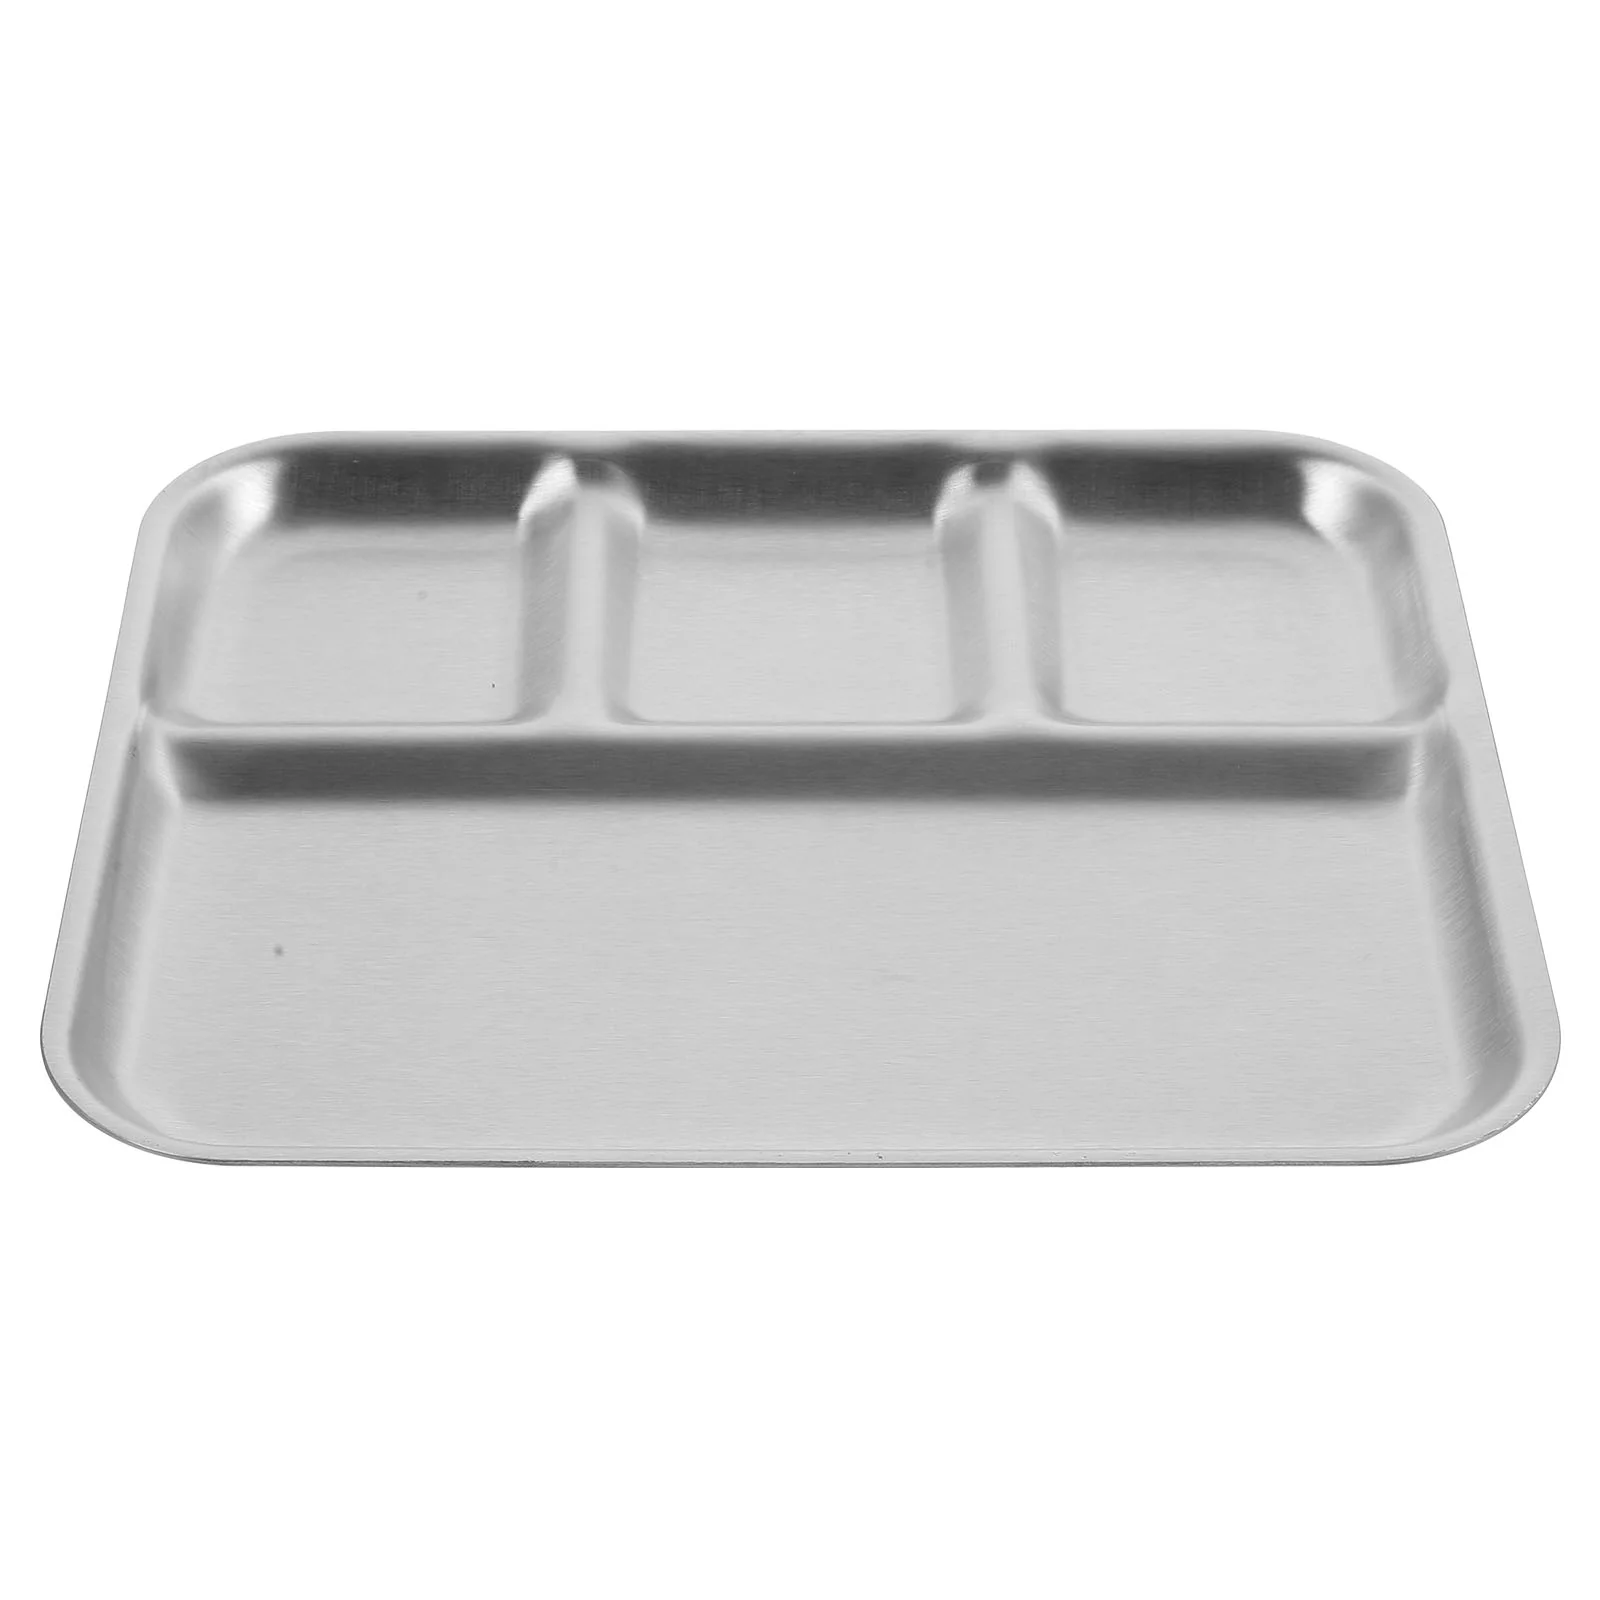 

Stainless Steel Grid Divided Serving Dish Appetizer Tray Plates For Kitchen Separated Seasoning Utensils